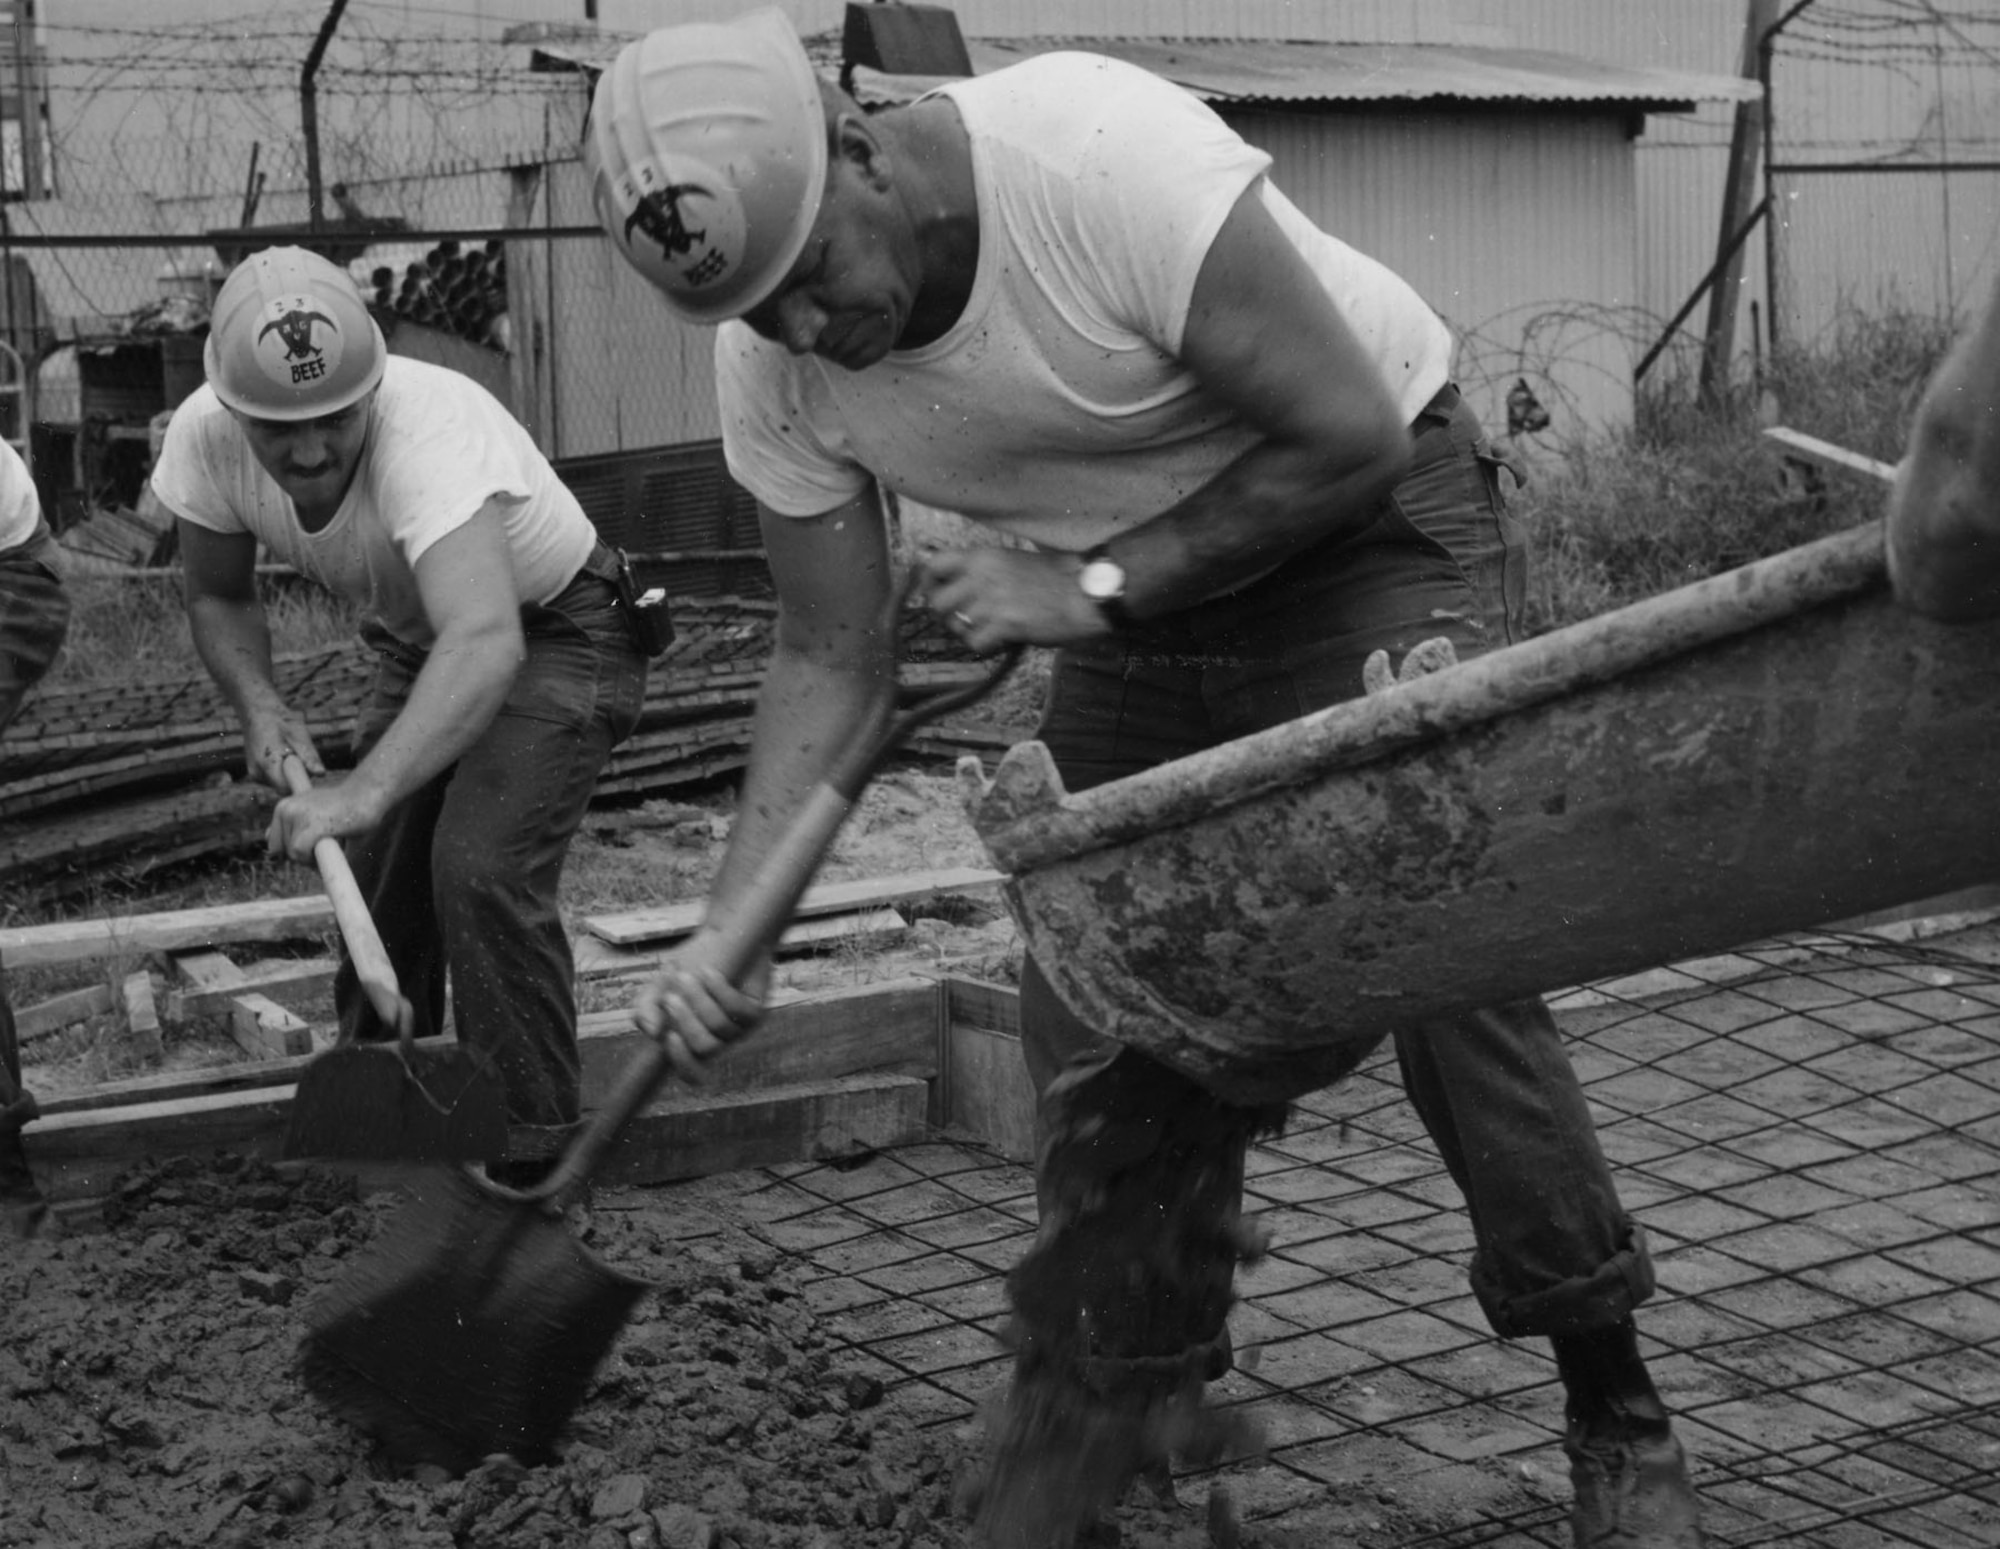 A Prime BEEF crew pours concrete for the floor of a building at Tan Son Nhut AB in South Vietnam. (U.S. Air Force photo)